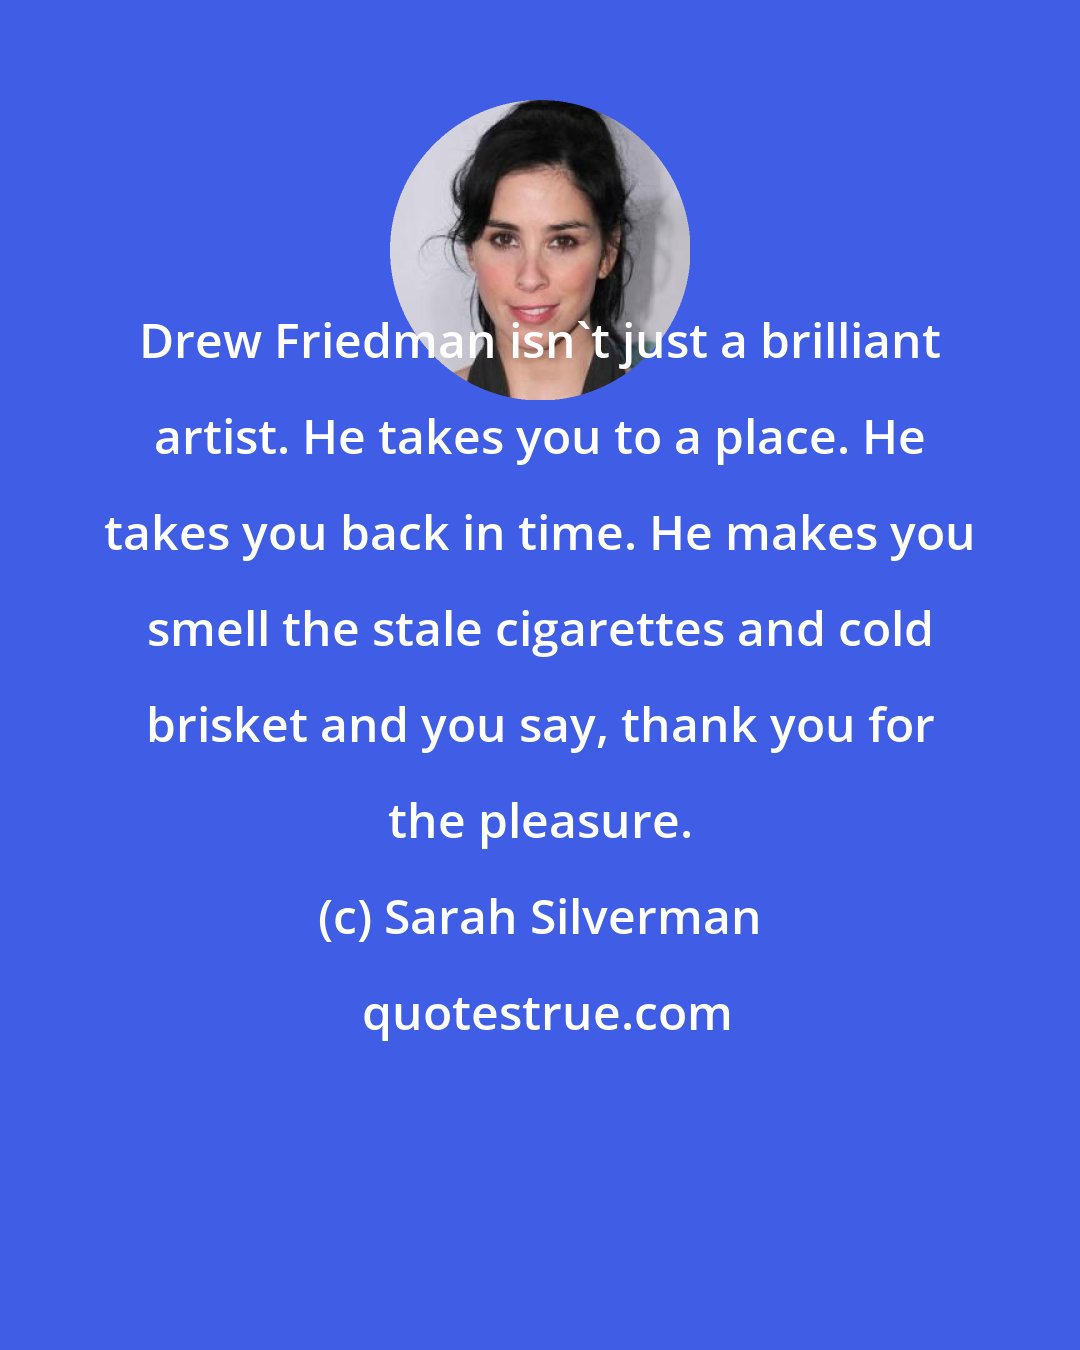 Sarah Silverman: Drew Friedman isn't just a brilliant artist. He takes you to a place. He takes you back in time. He makes you smell the stale cigarettes and cold brisket and you say, thank you for the pleasure.